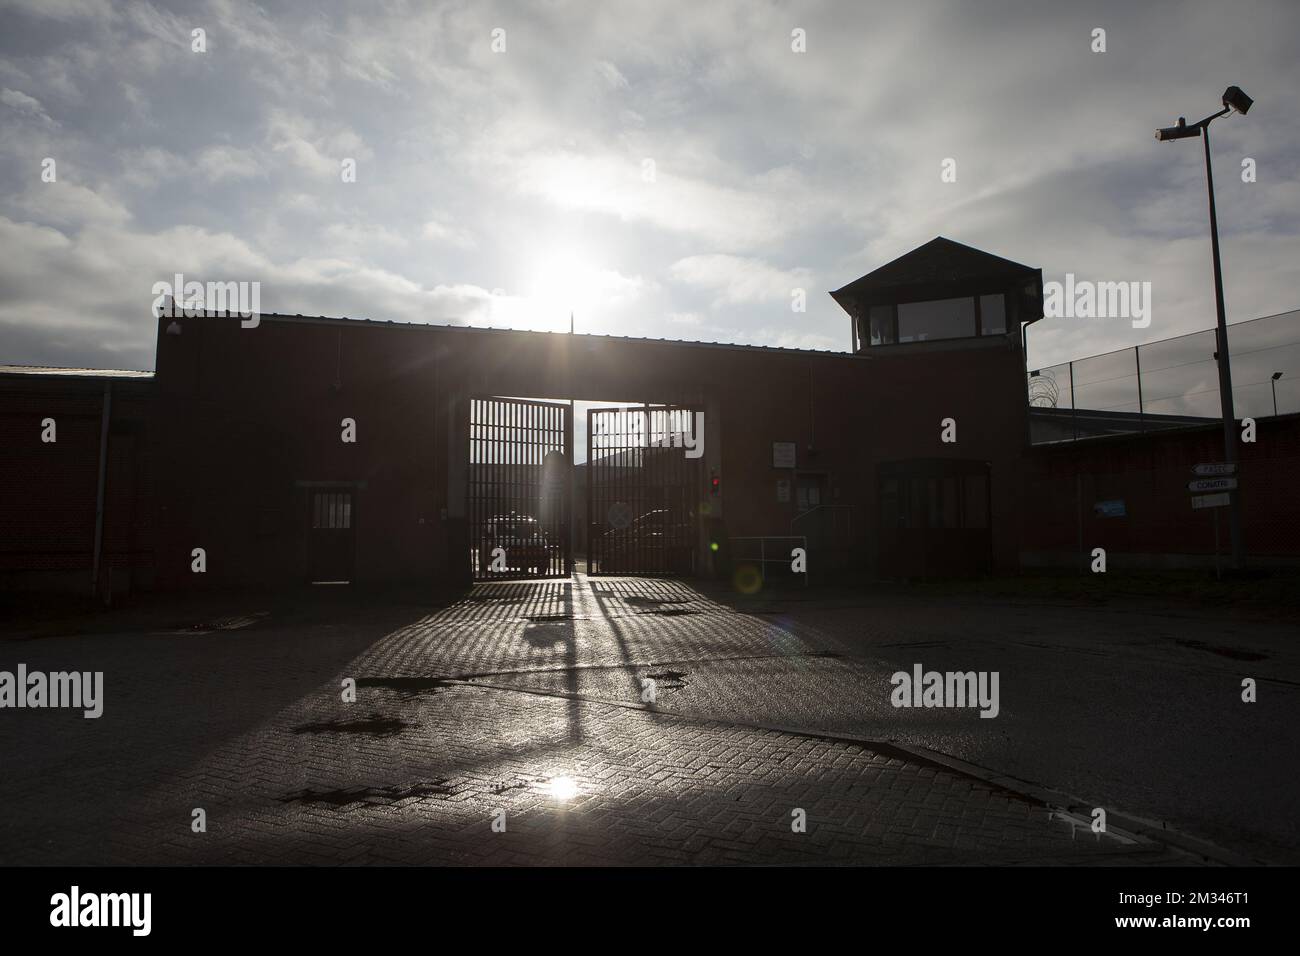 Illustration picture shows the prison in Merksplas during a hostage action, Thursday 31 December 2020. One of the prisoners takes his three cellmates hostage. BELGA PHOTO KRISTOF VAN ACCOM Stock Photo